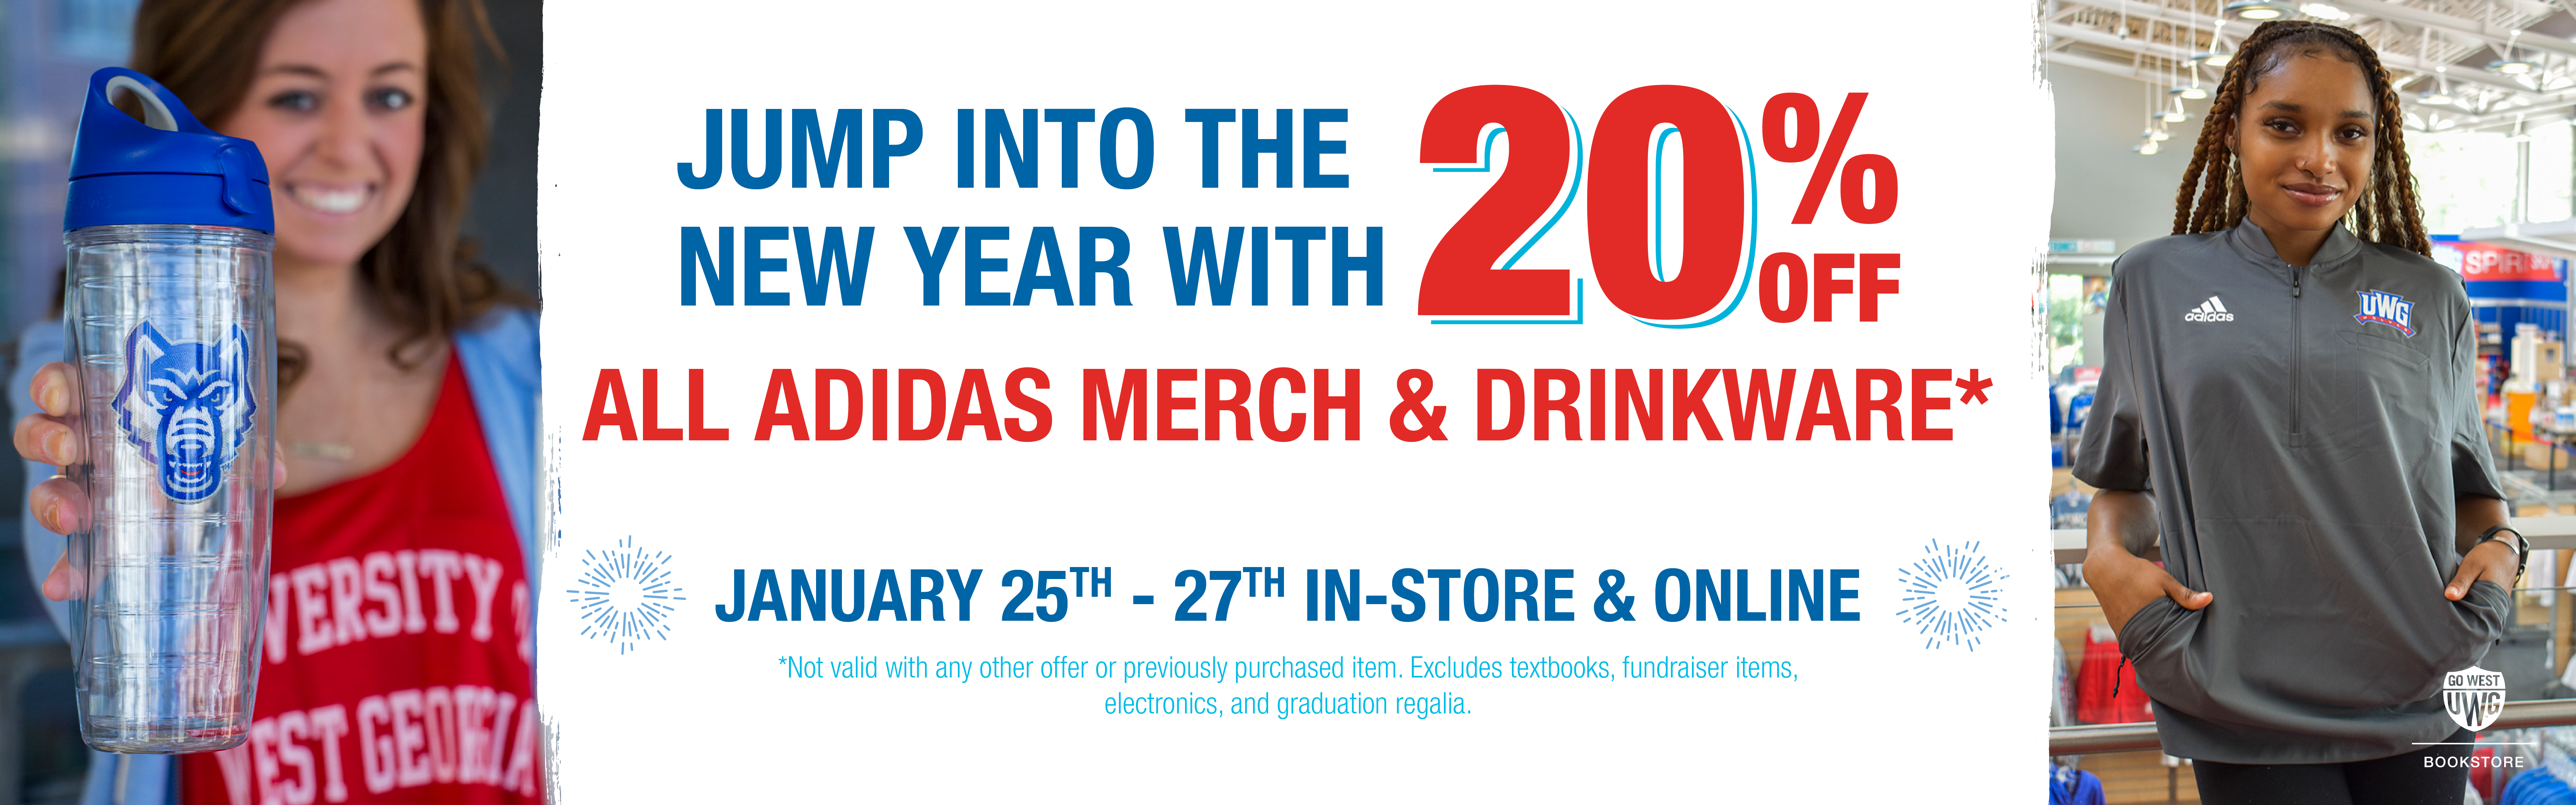 Jump into the new year with 20% off all adidas merch and drinkware from January 25th-27th in-store and online. *Not valid with any other offer or previously purchased item.